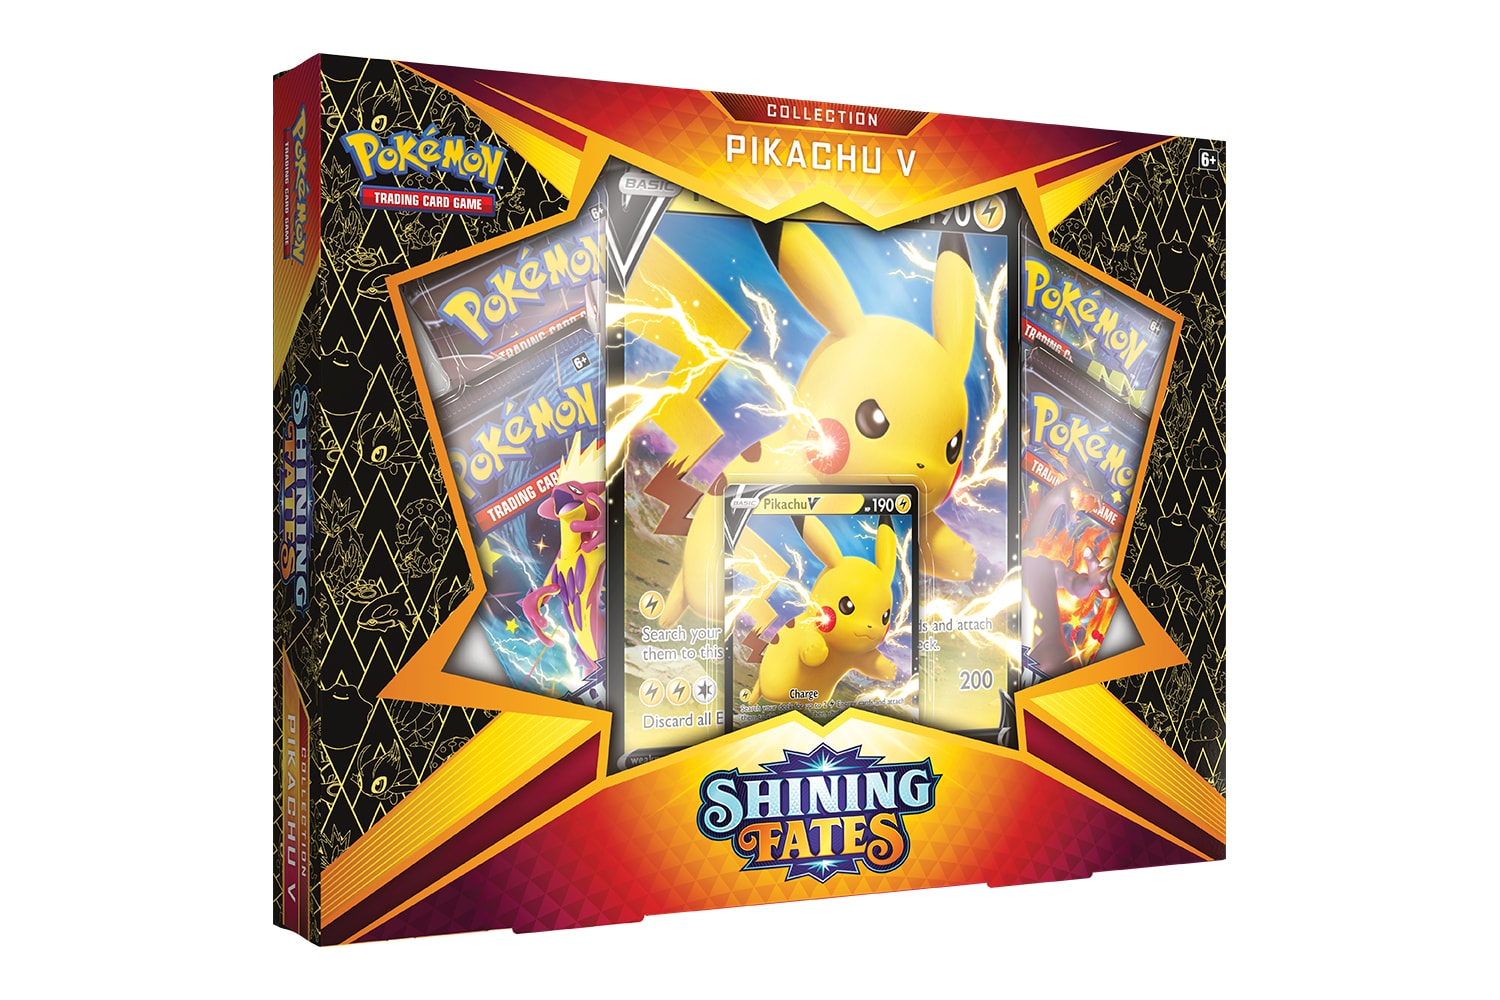 Pokémon TCG Shining Fates Expansion Now Available News Release Charizard Pikachu VMAX V Booters TCG Gaming Eevee ETB Elite trainer box 